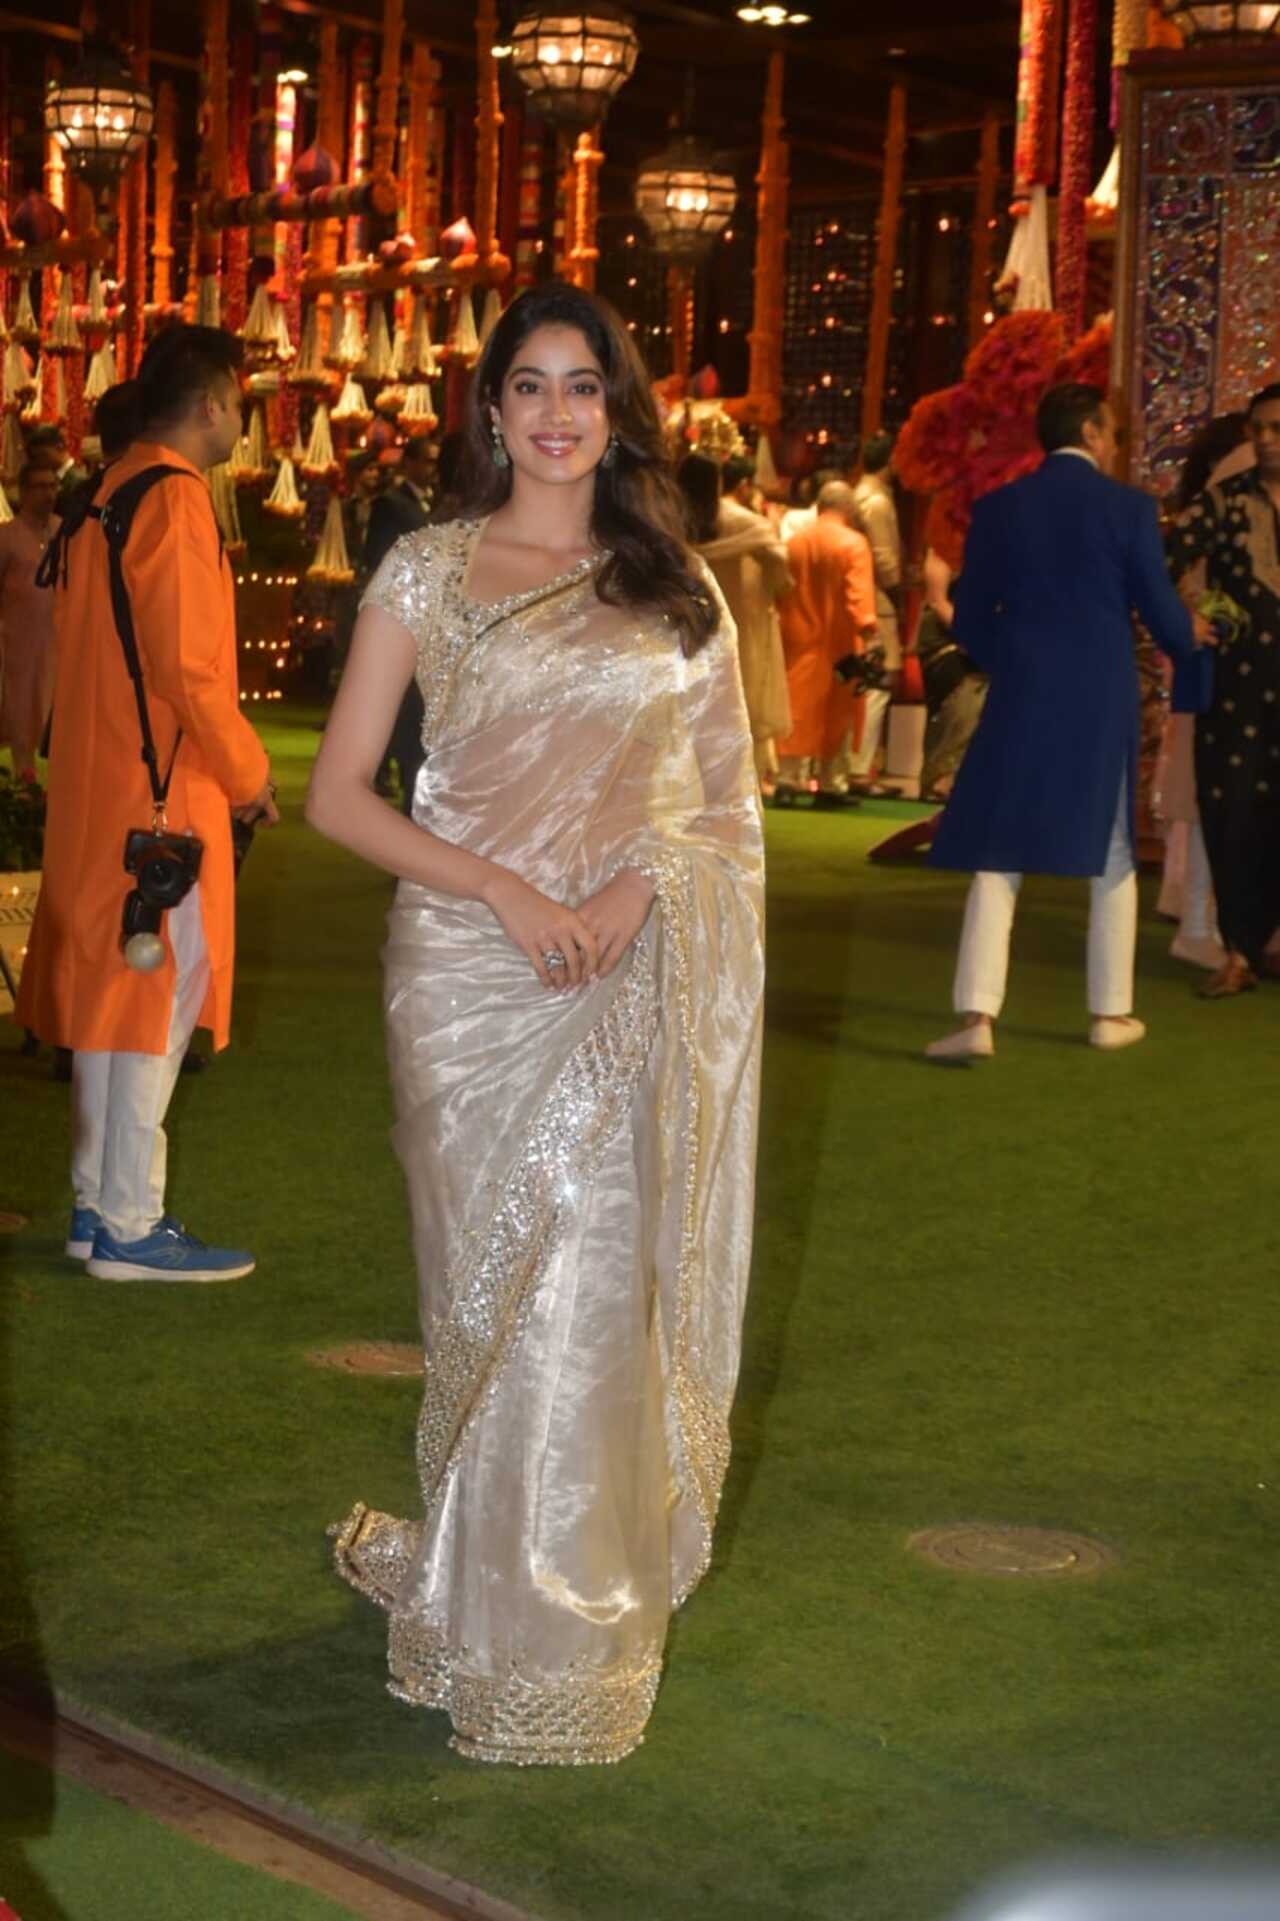 Janhvi Kapoor looked gorgeous in a warm gold saree with an embellished border